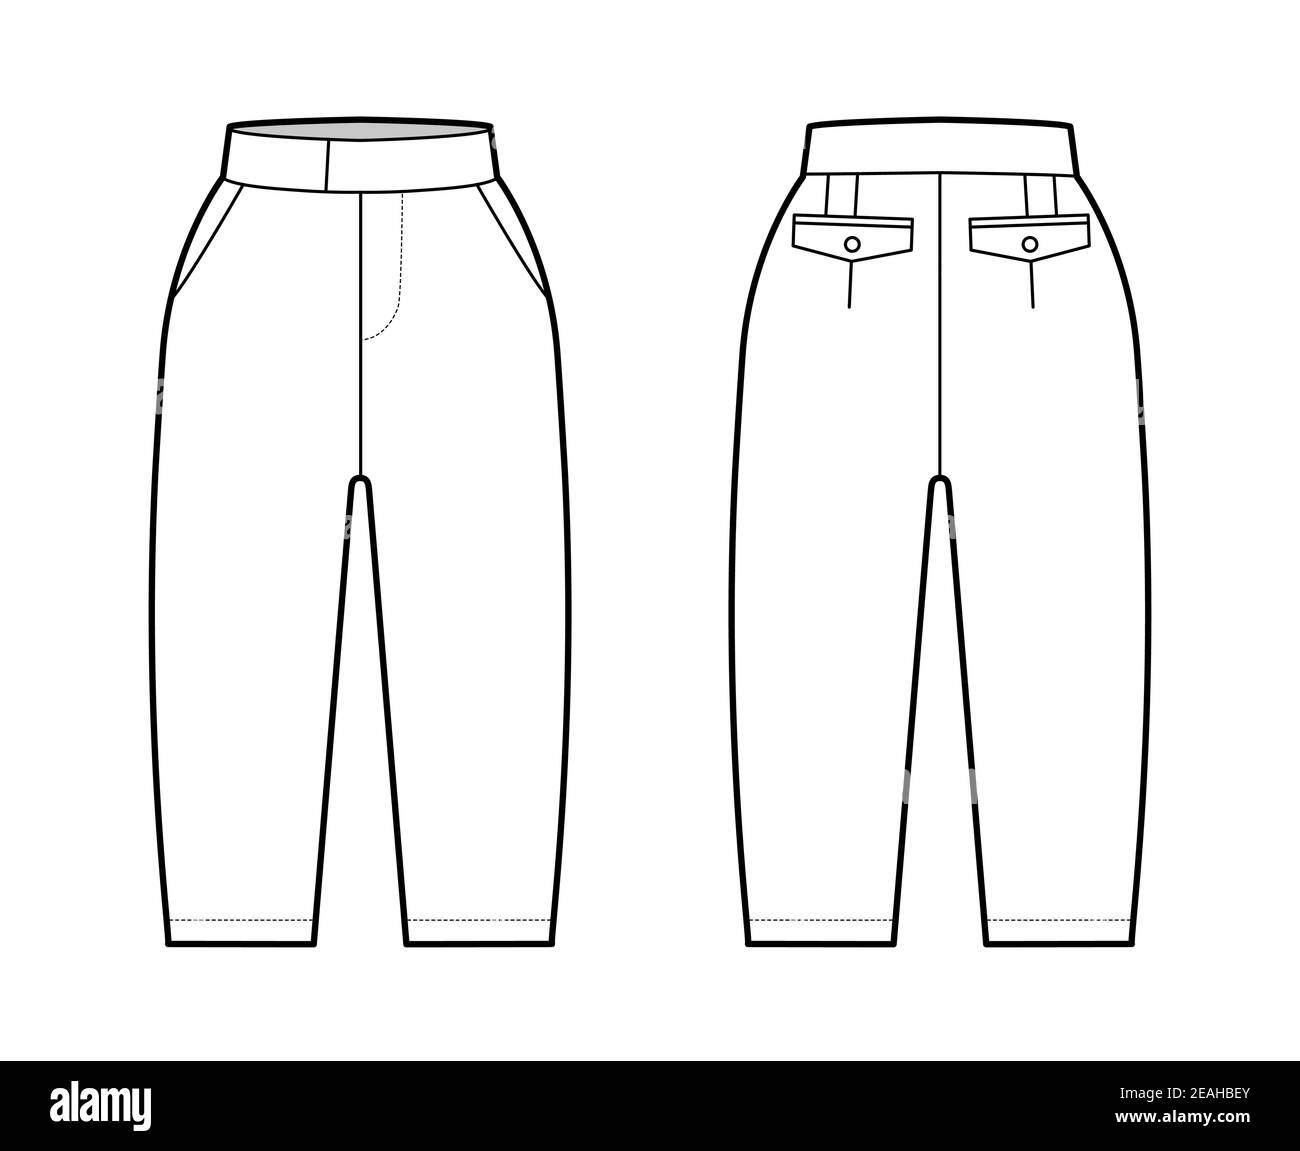 Short capri pants technical fashion illustration with knee length, normal  waist, high rise, slashed pocket, extended waistband. Flat bottom template  front, back white color style. Women men CAD mockup Stock Vector Image